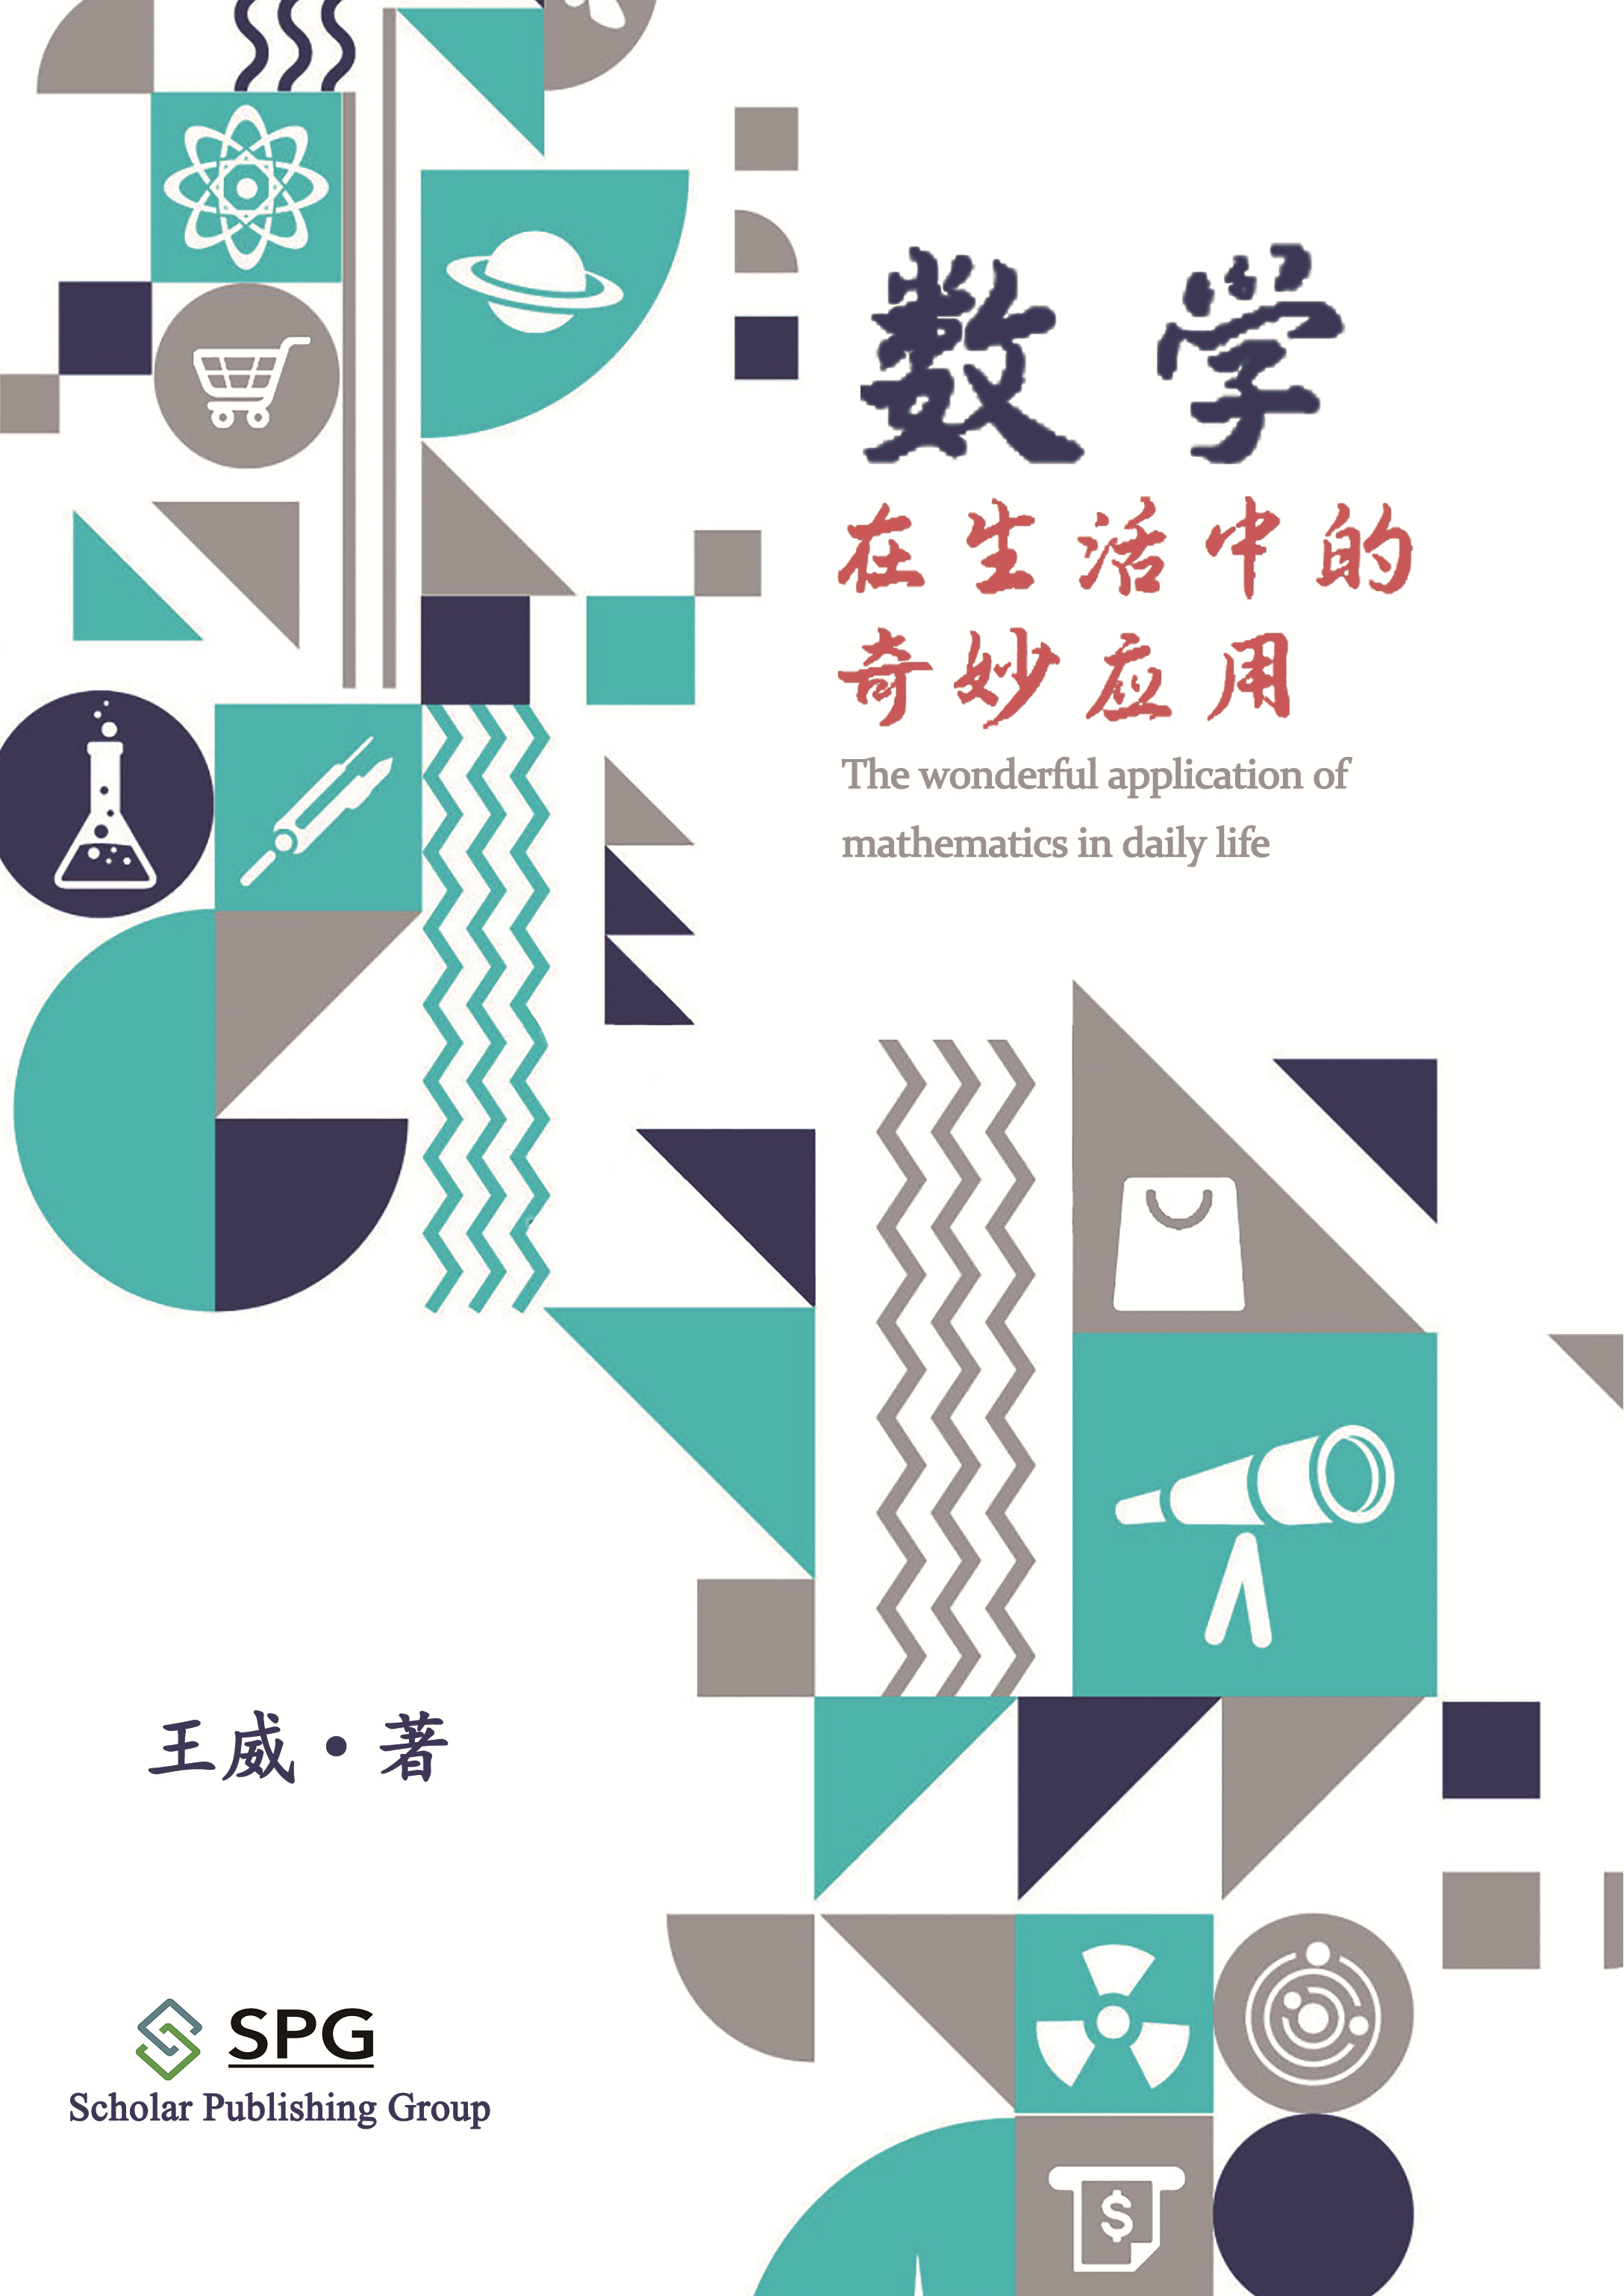 The Wonderful Application of Mathematics in Daily Life | Scholar Publishing Group